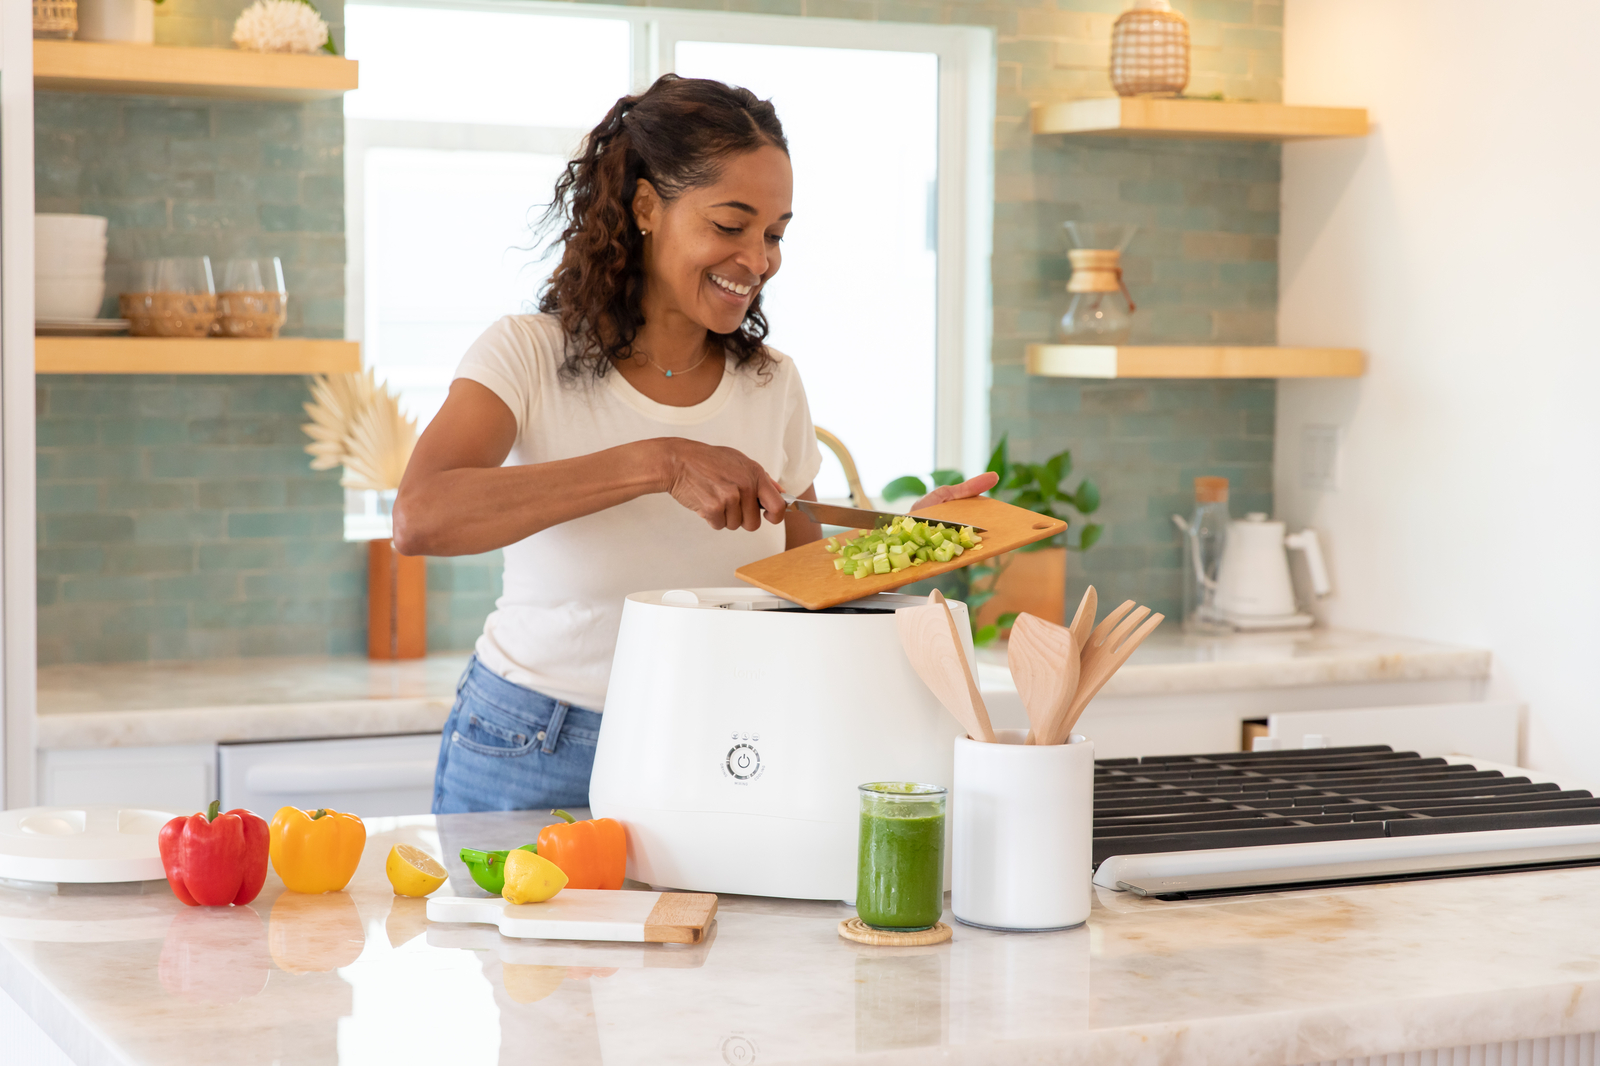 Introducing the Smart Pot Urban Compost Sak: The Perfect Composting  Solution for Small Space Gardeners – Smart Pot®